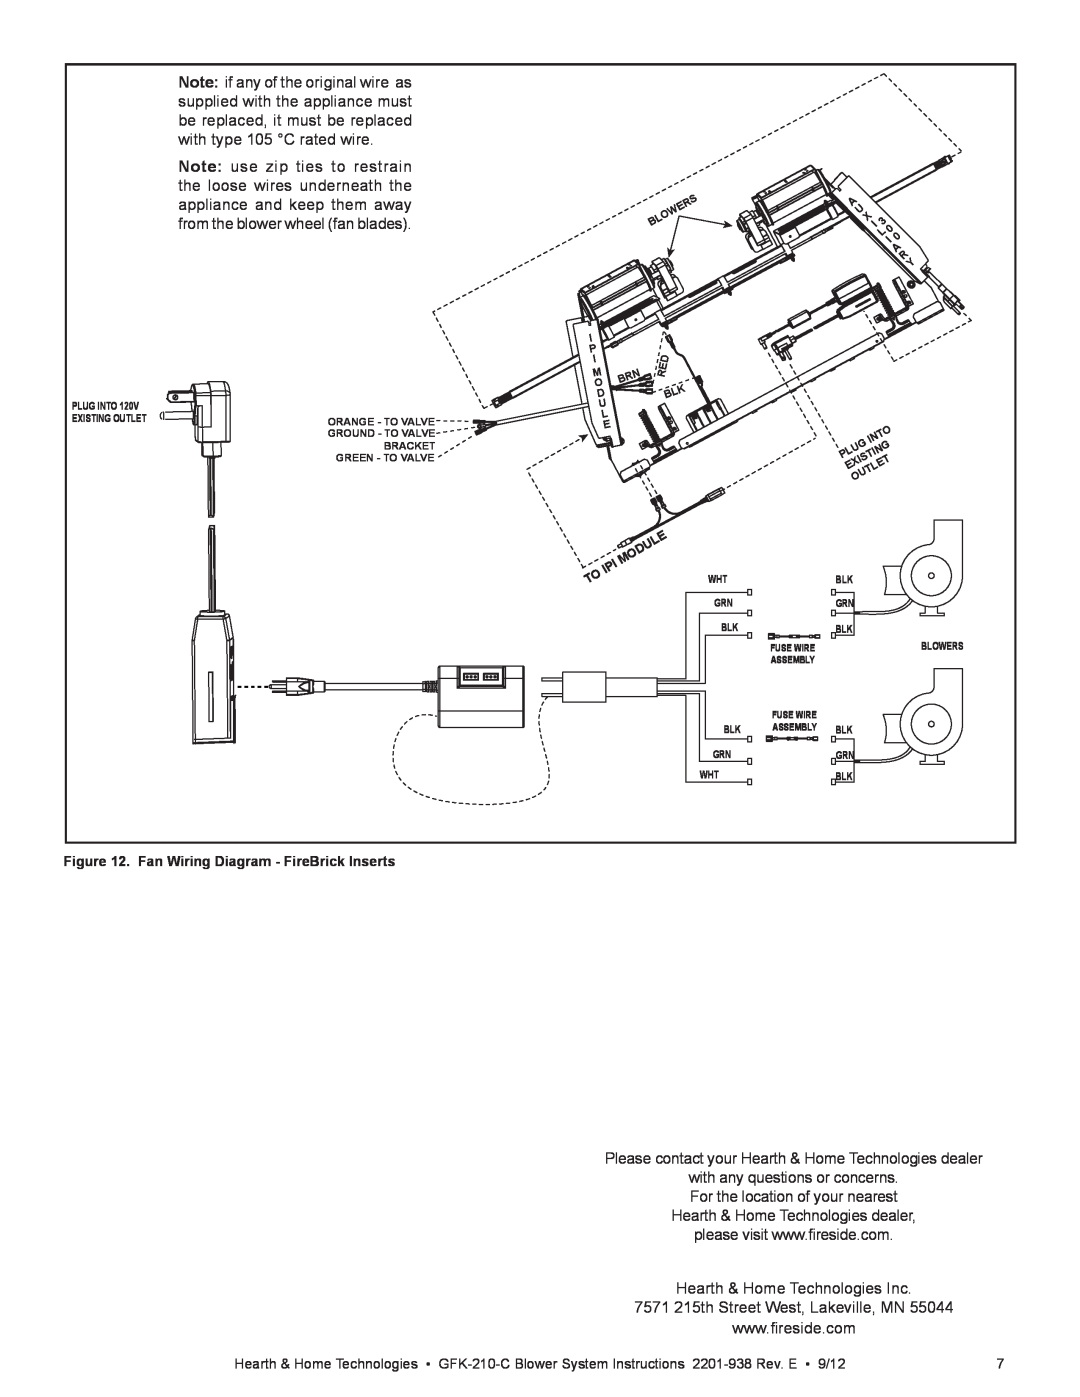 Hearth and Home Technologies GFK-210-C installation manual Please contact your Hearth & Home Technologies dealer 